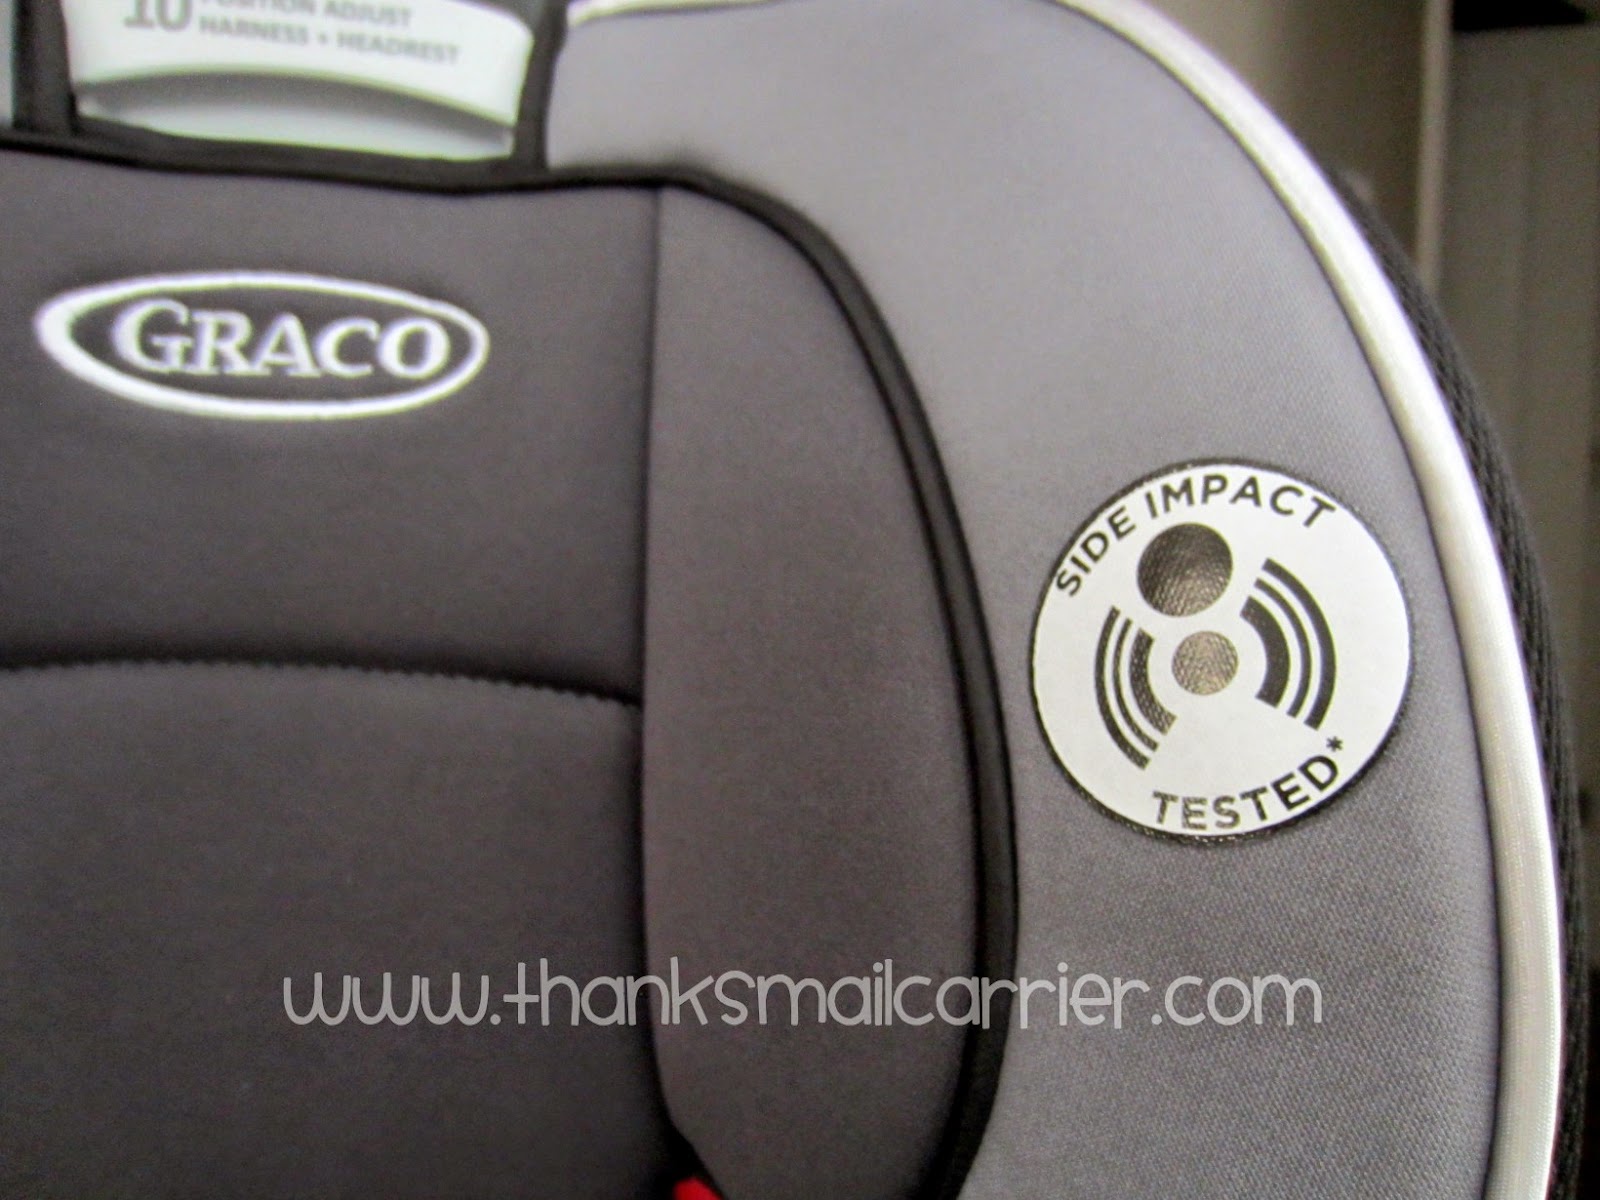 Graco car seat head protection